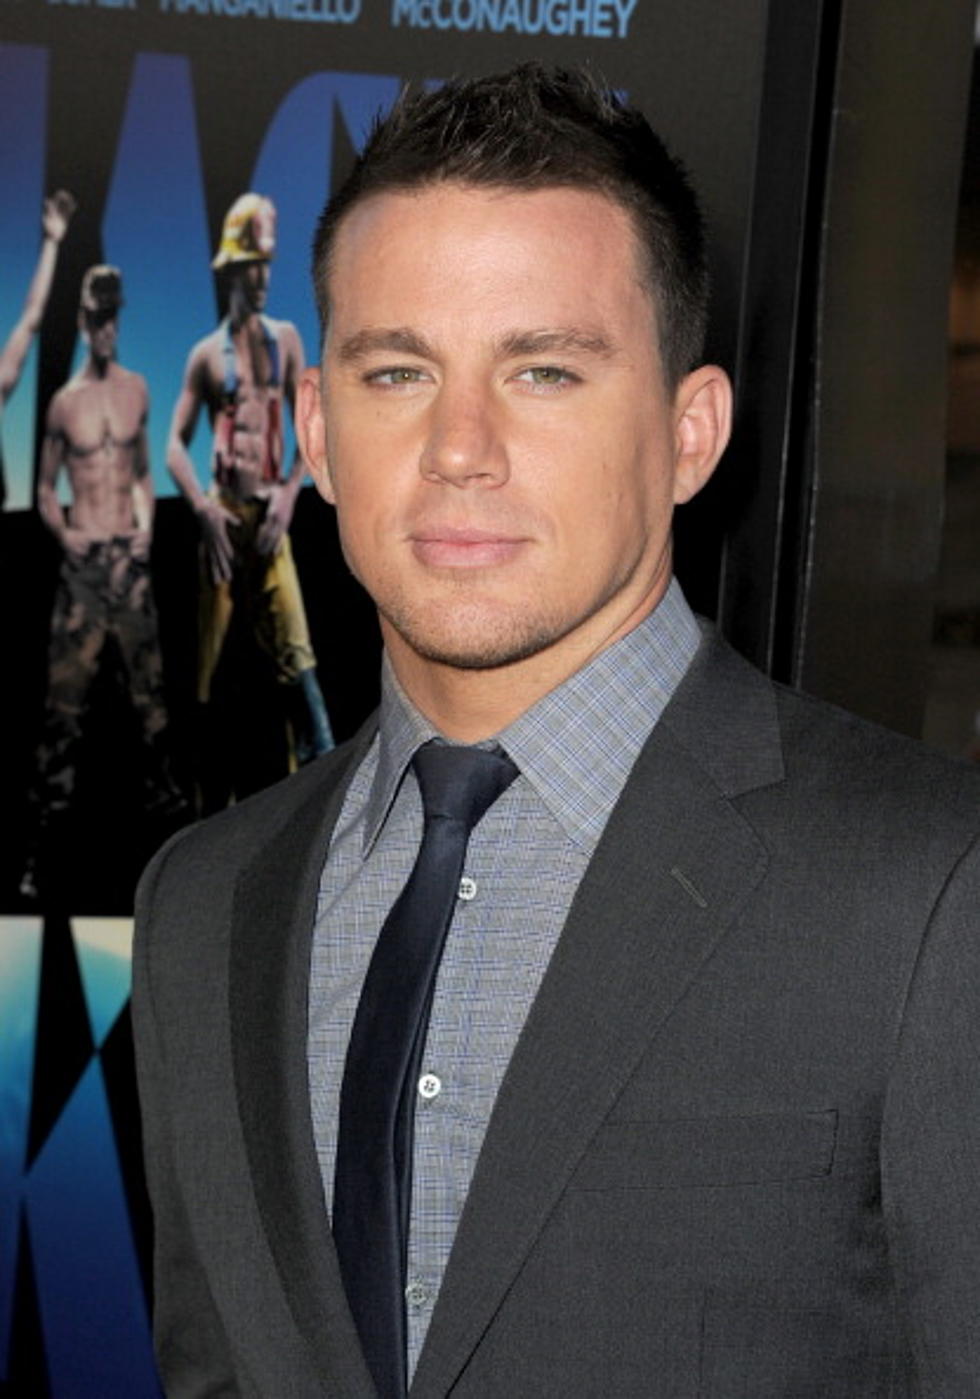 Channing Tatum Named People Magazine Sexiest Man Alive [PHOTOS]